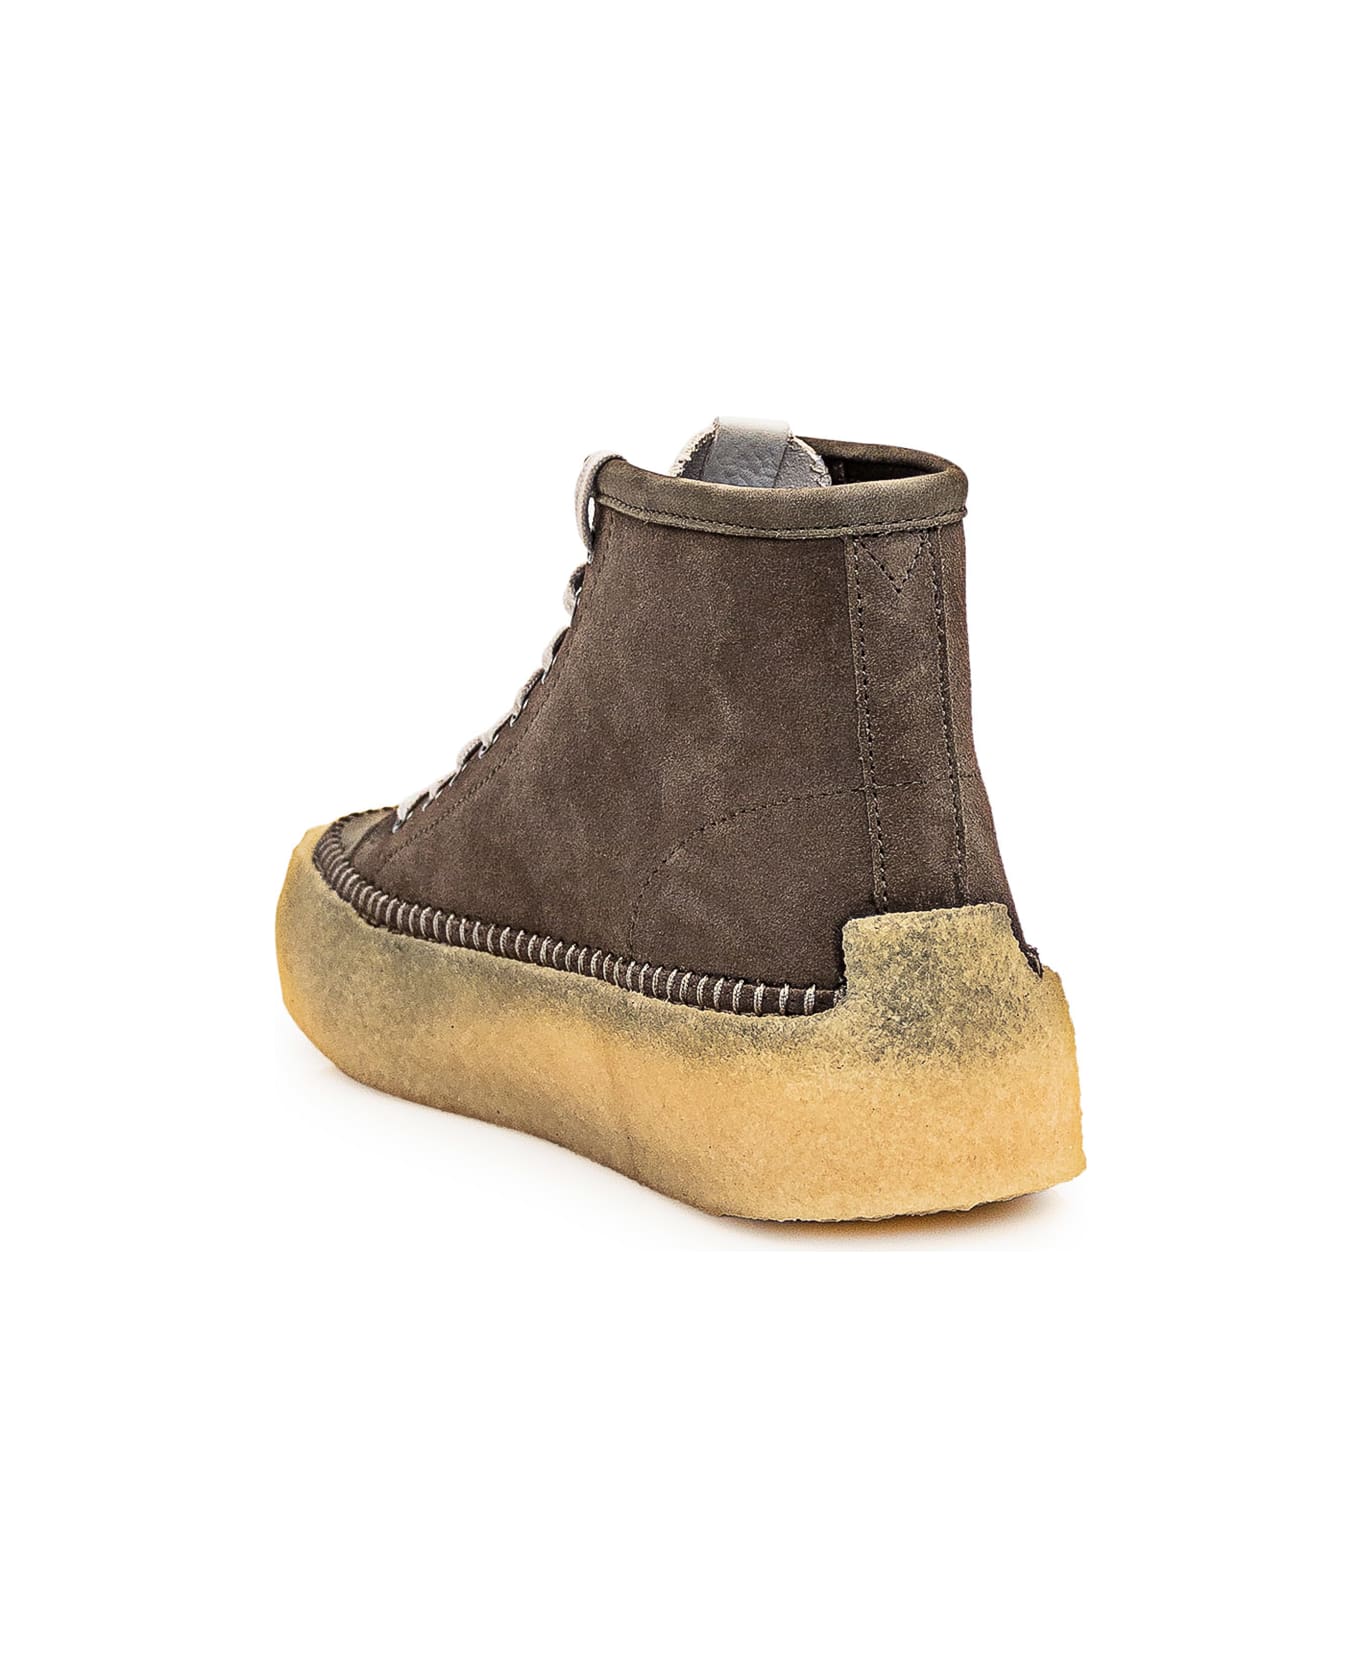 Clarks Caravad Mid Boots - ARMY